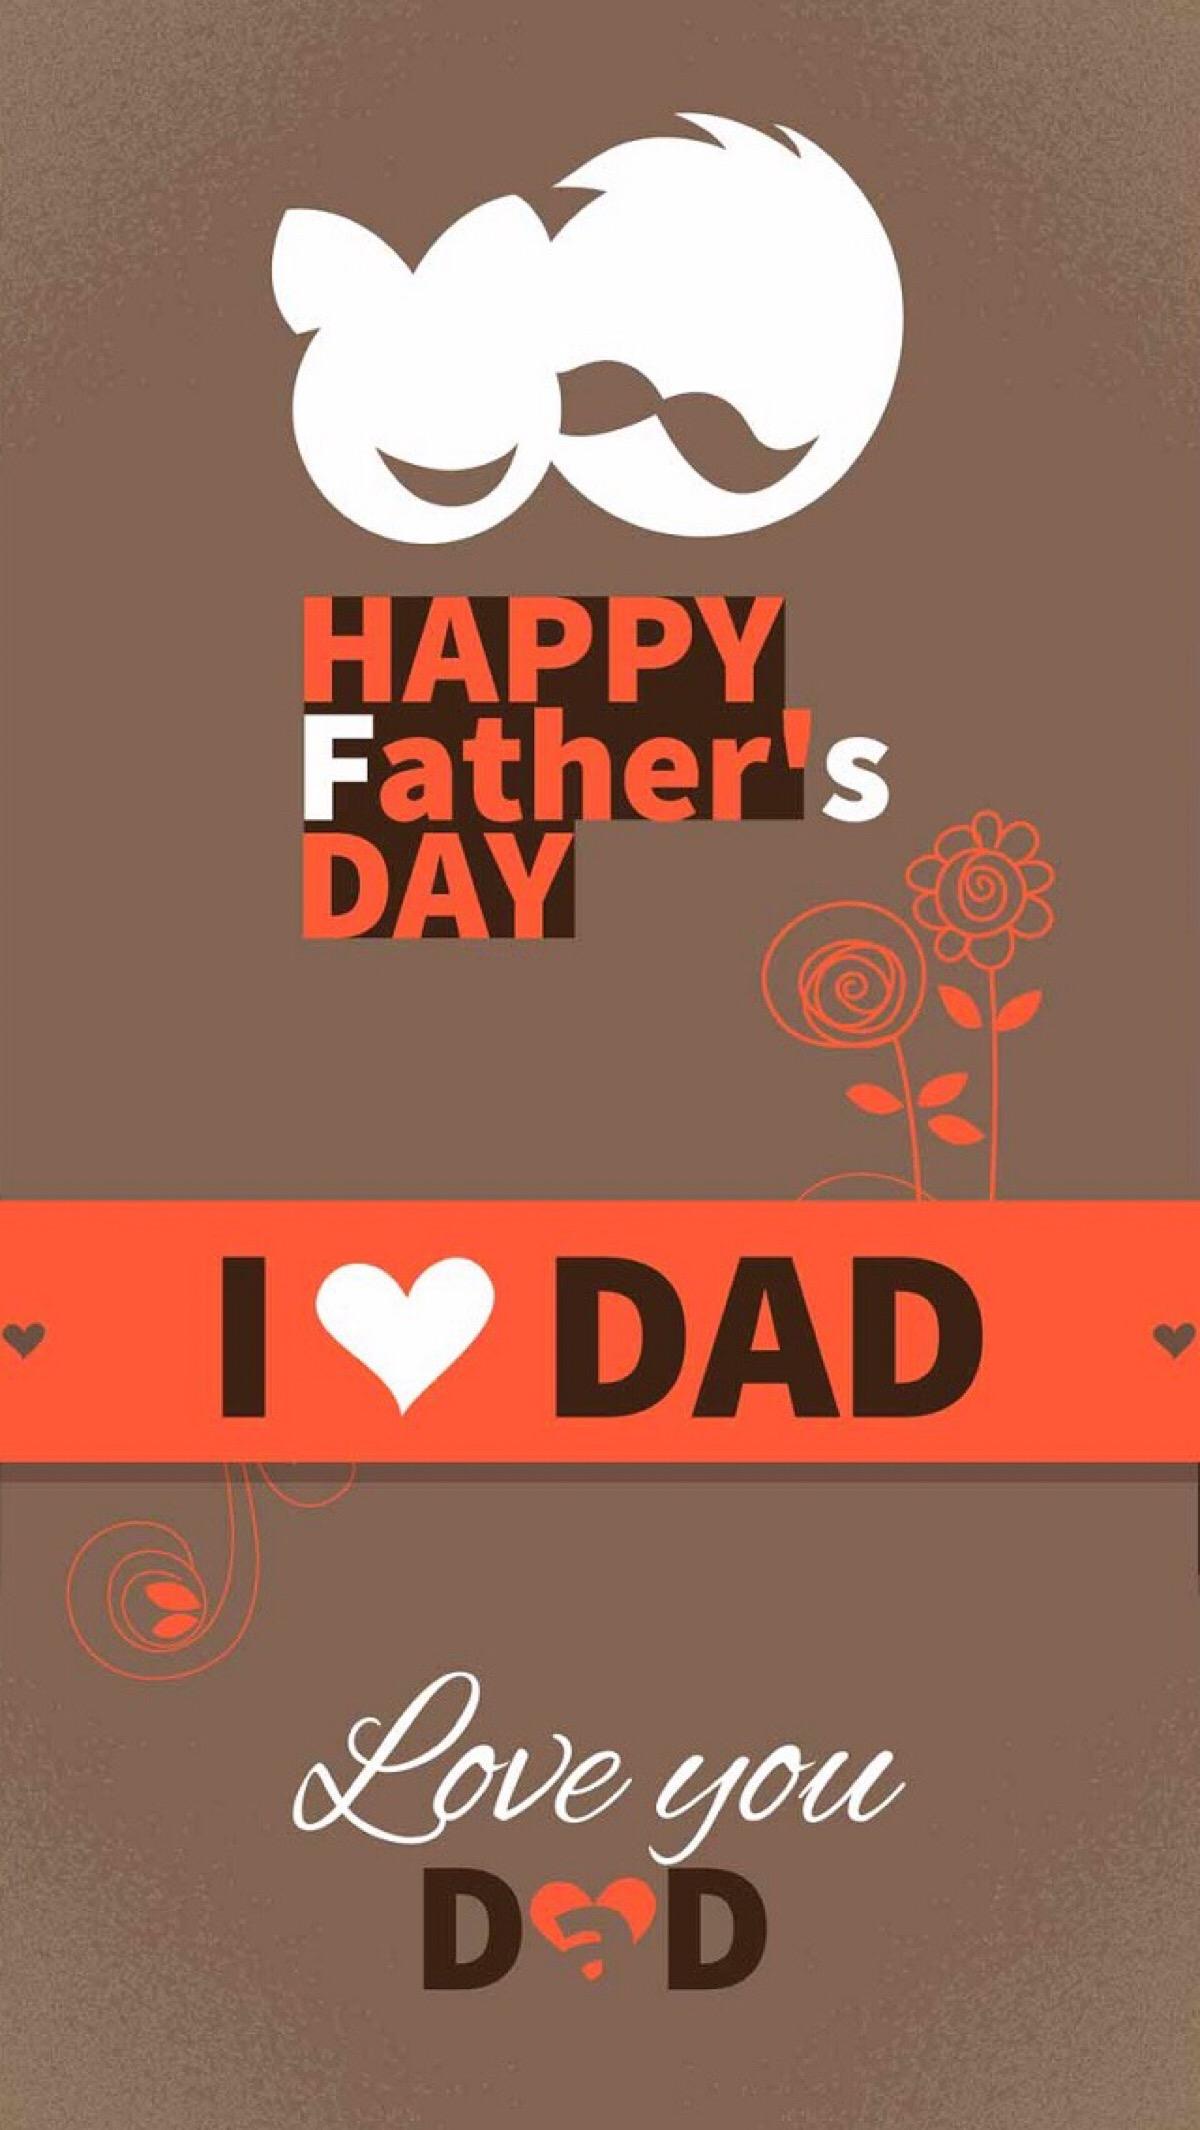 fatherday，fatherday怎么读